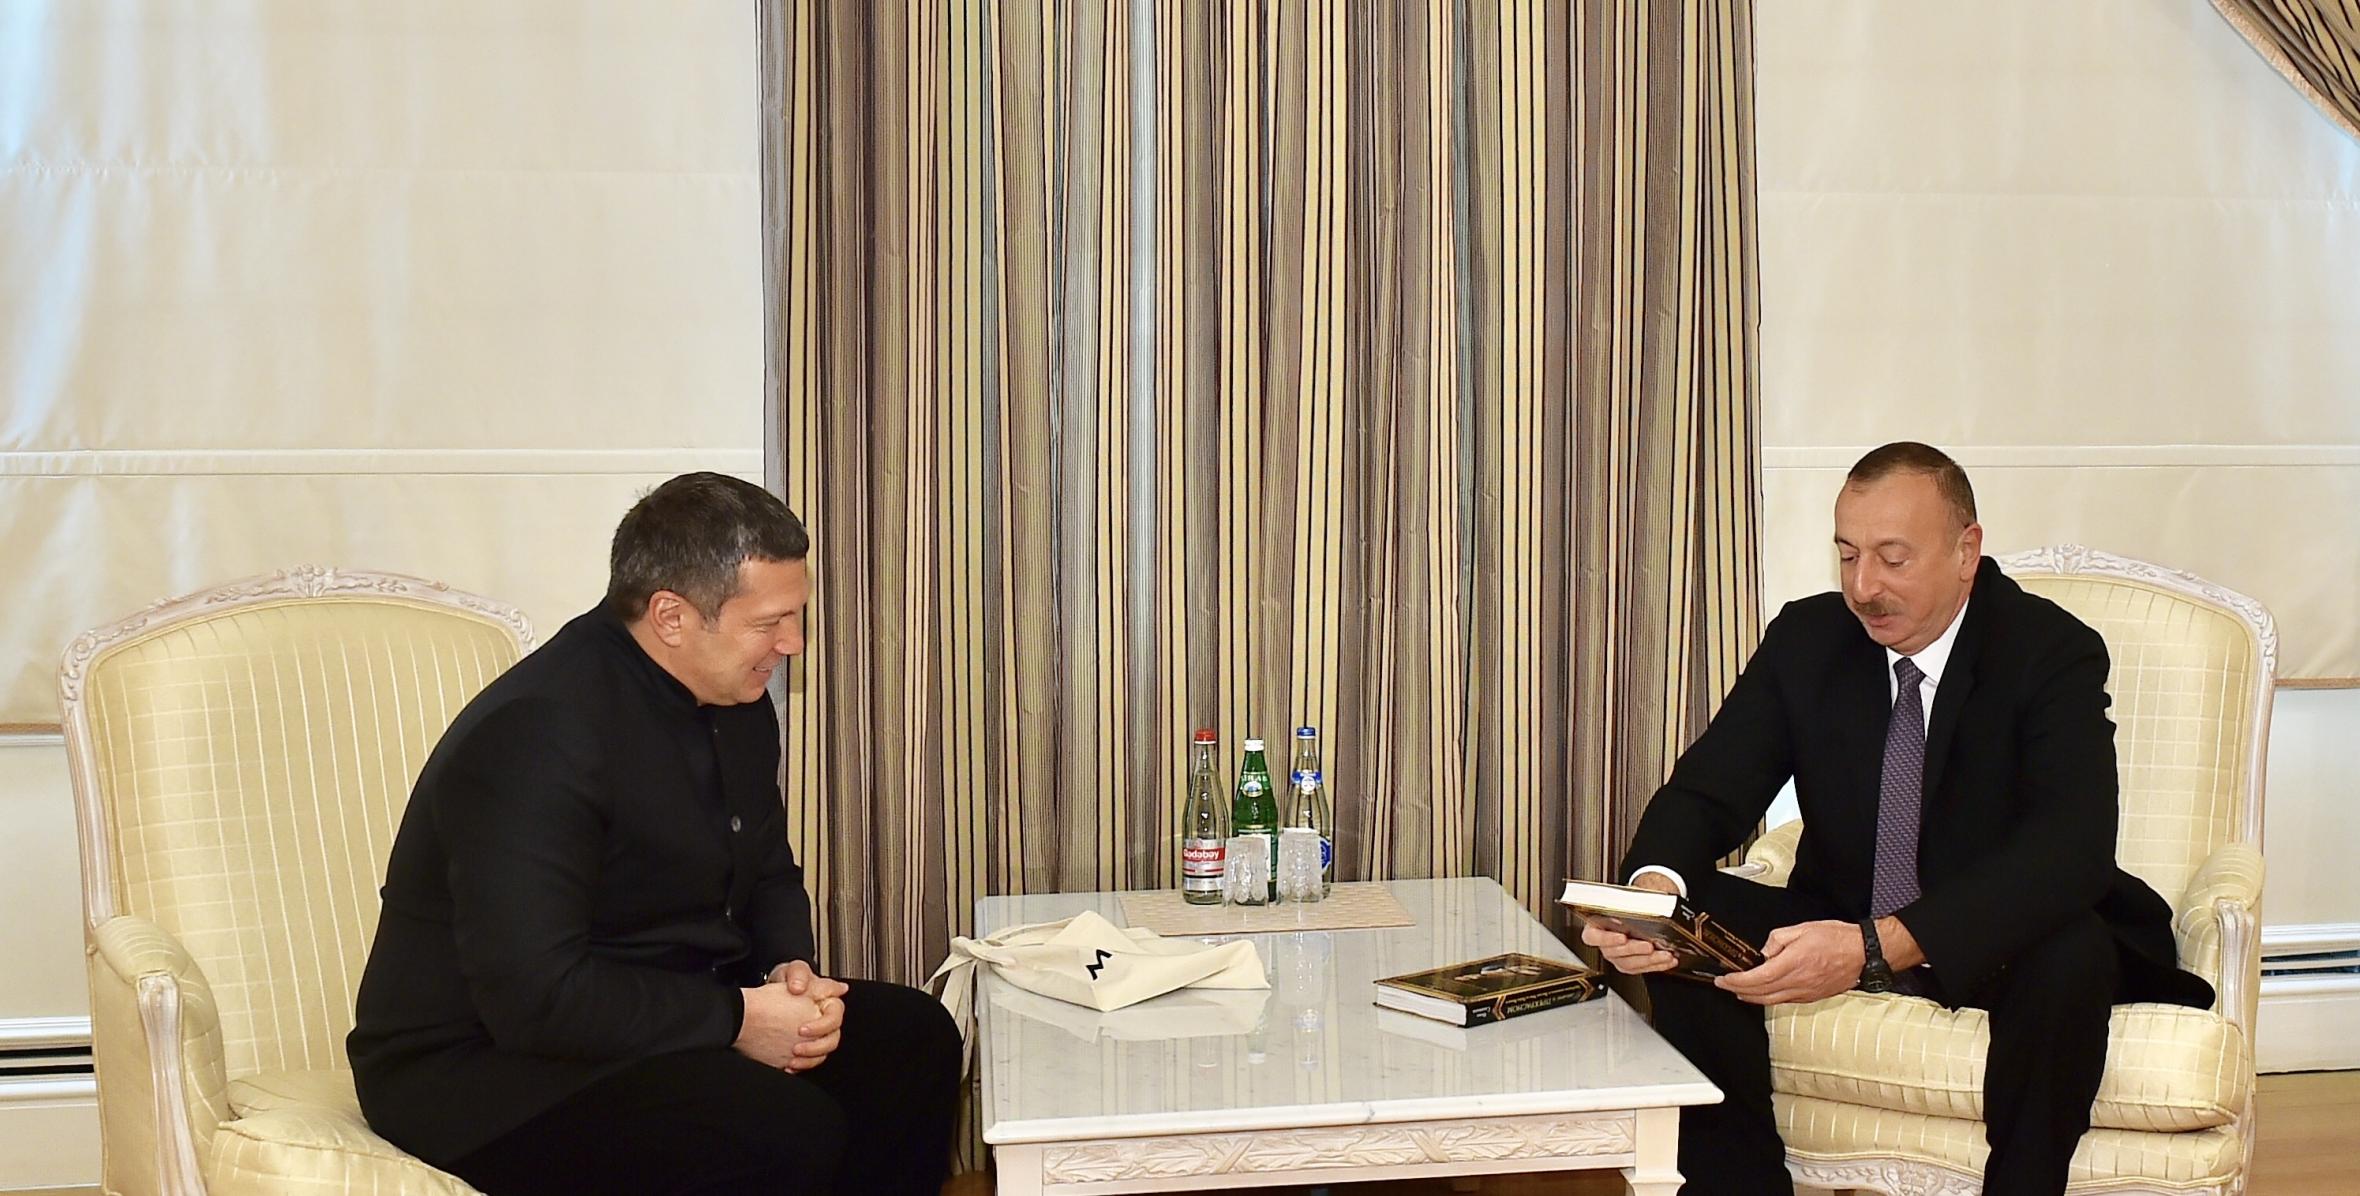 Ilham Aliyev met with TV and radio host of All-Russia State Television and Radio Broadcasting Company Vladimir Solovyov